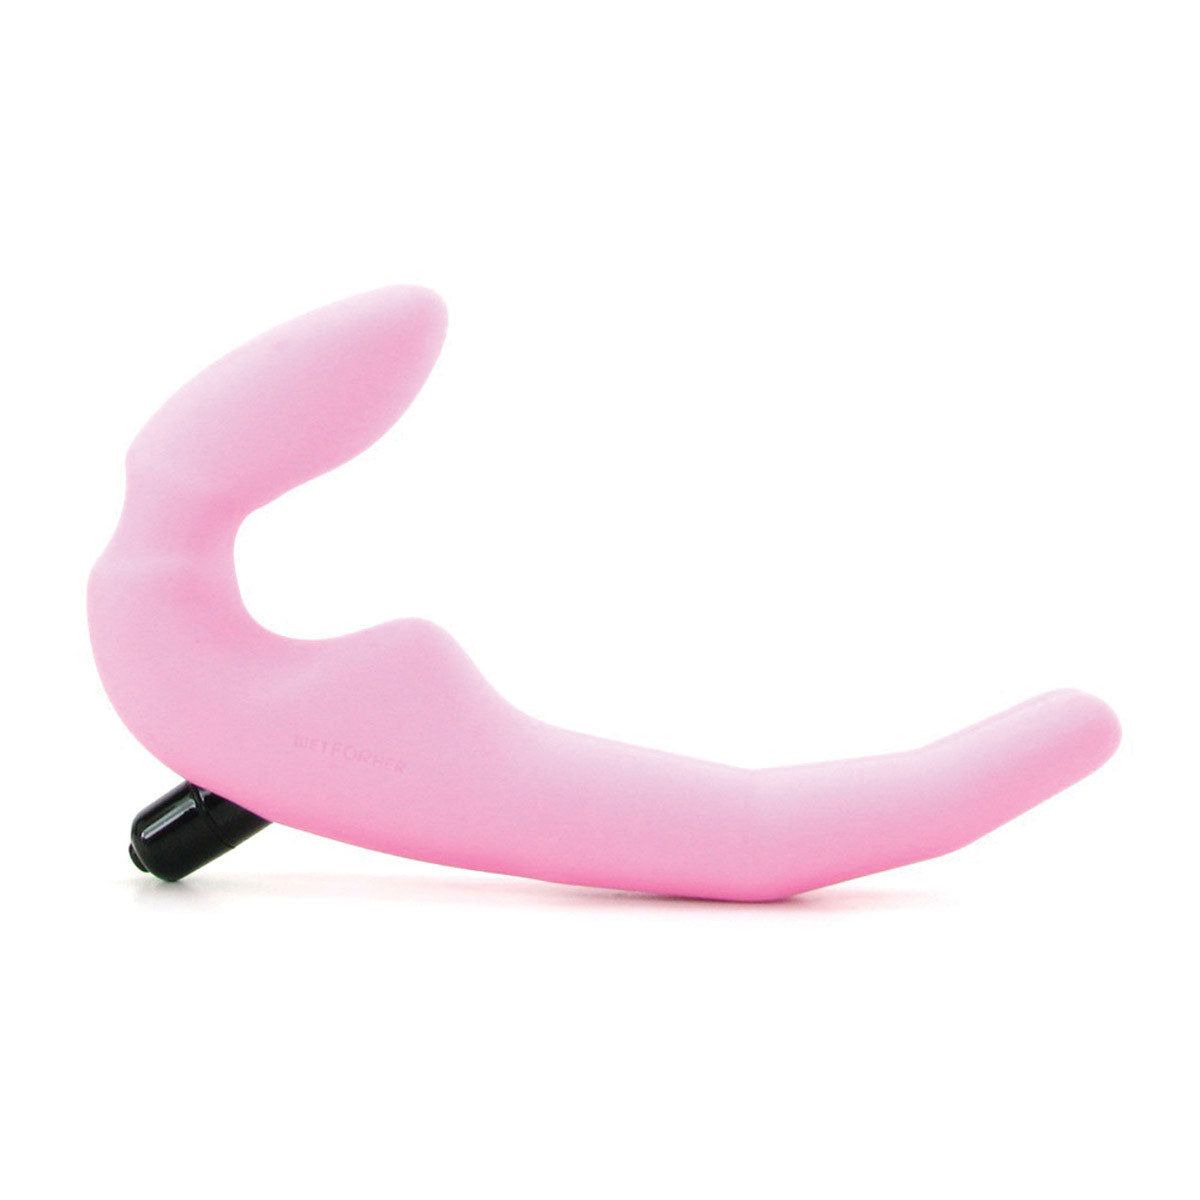 Wet for Her Four More Couples Double Strap-On G-Spot Vibrator Rose